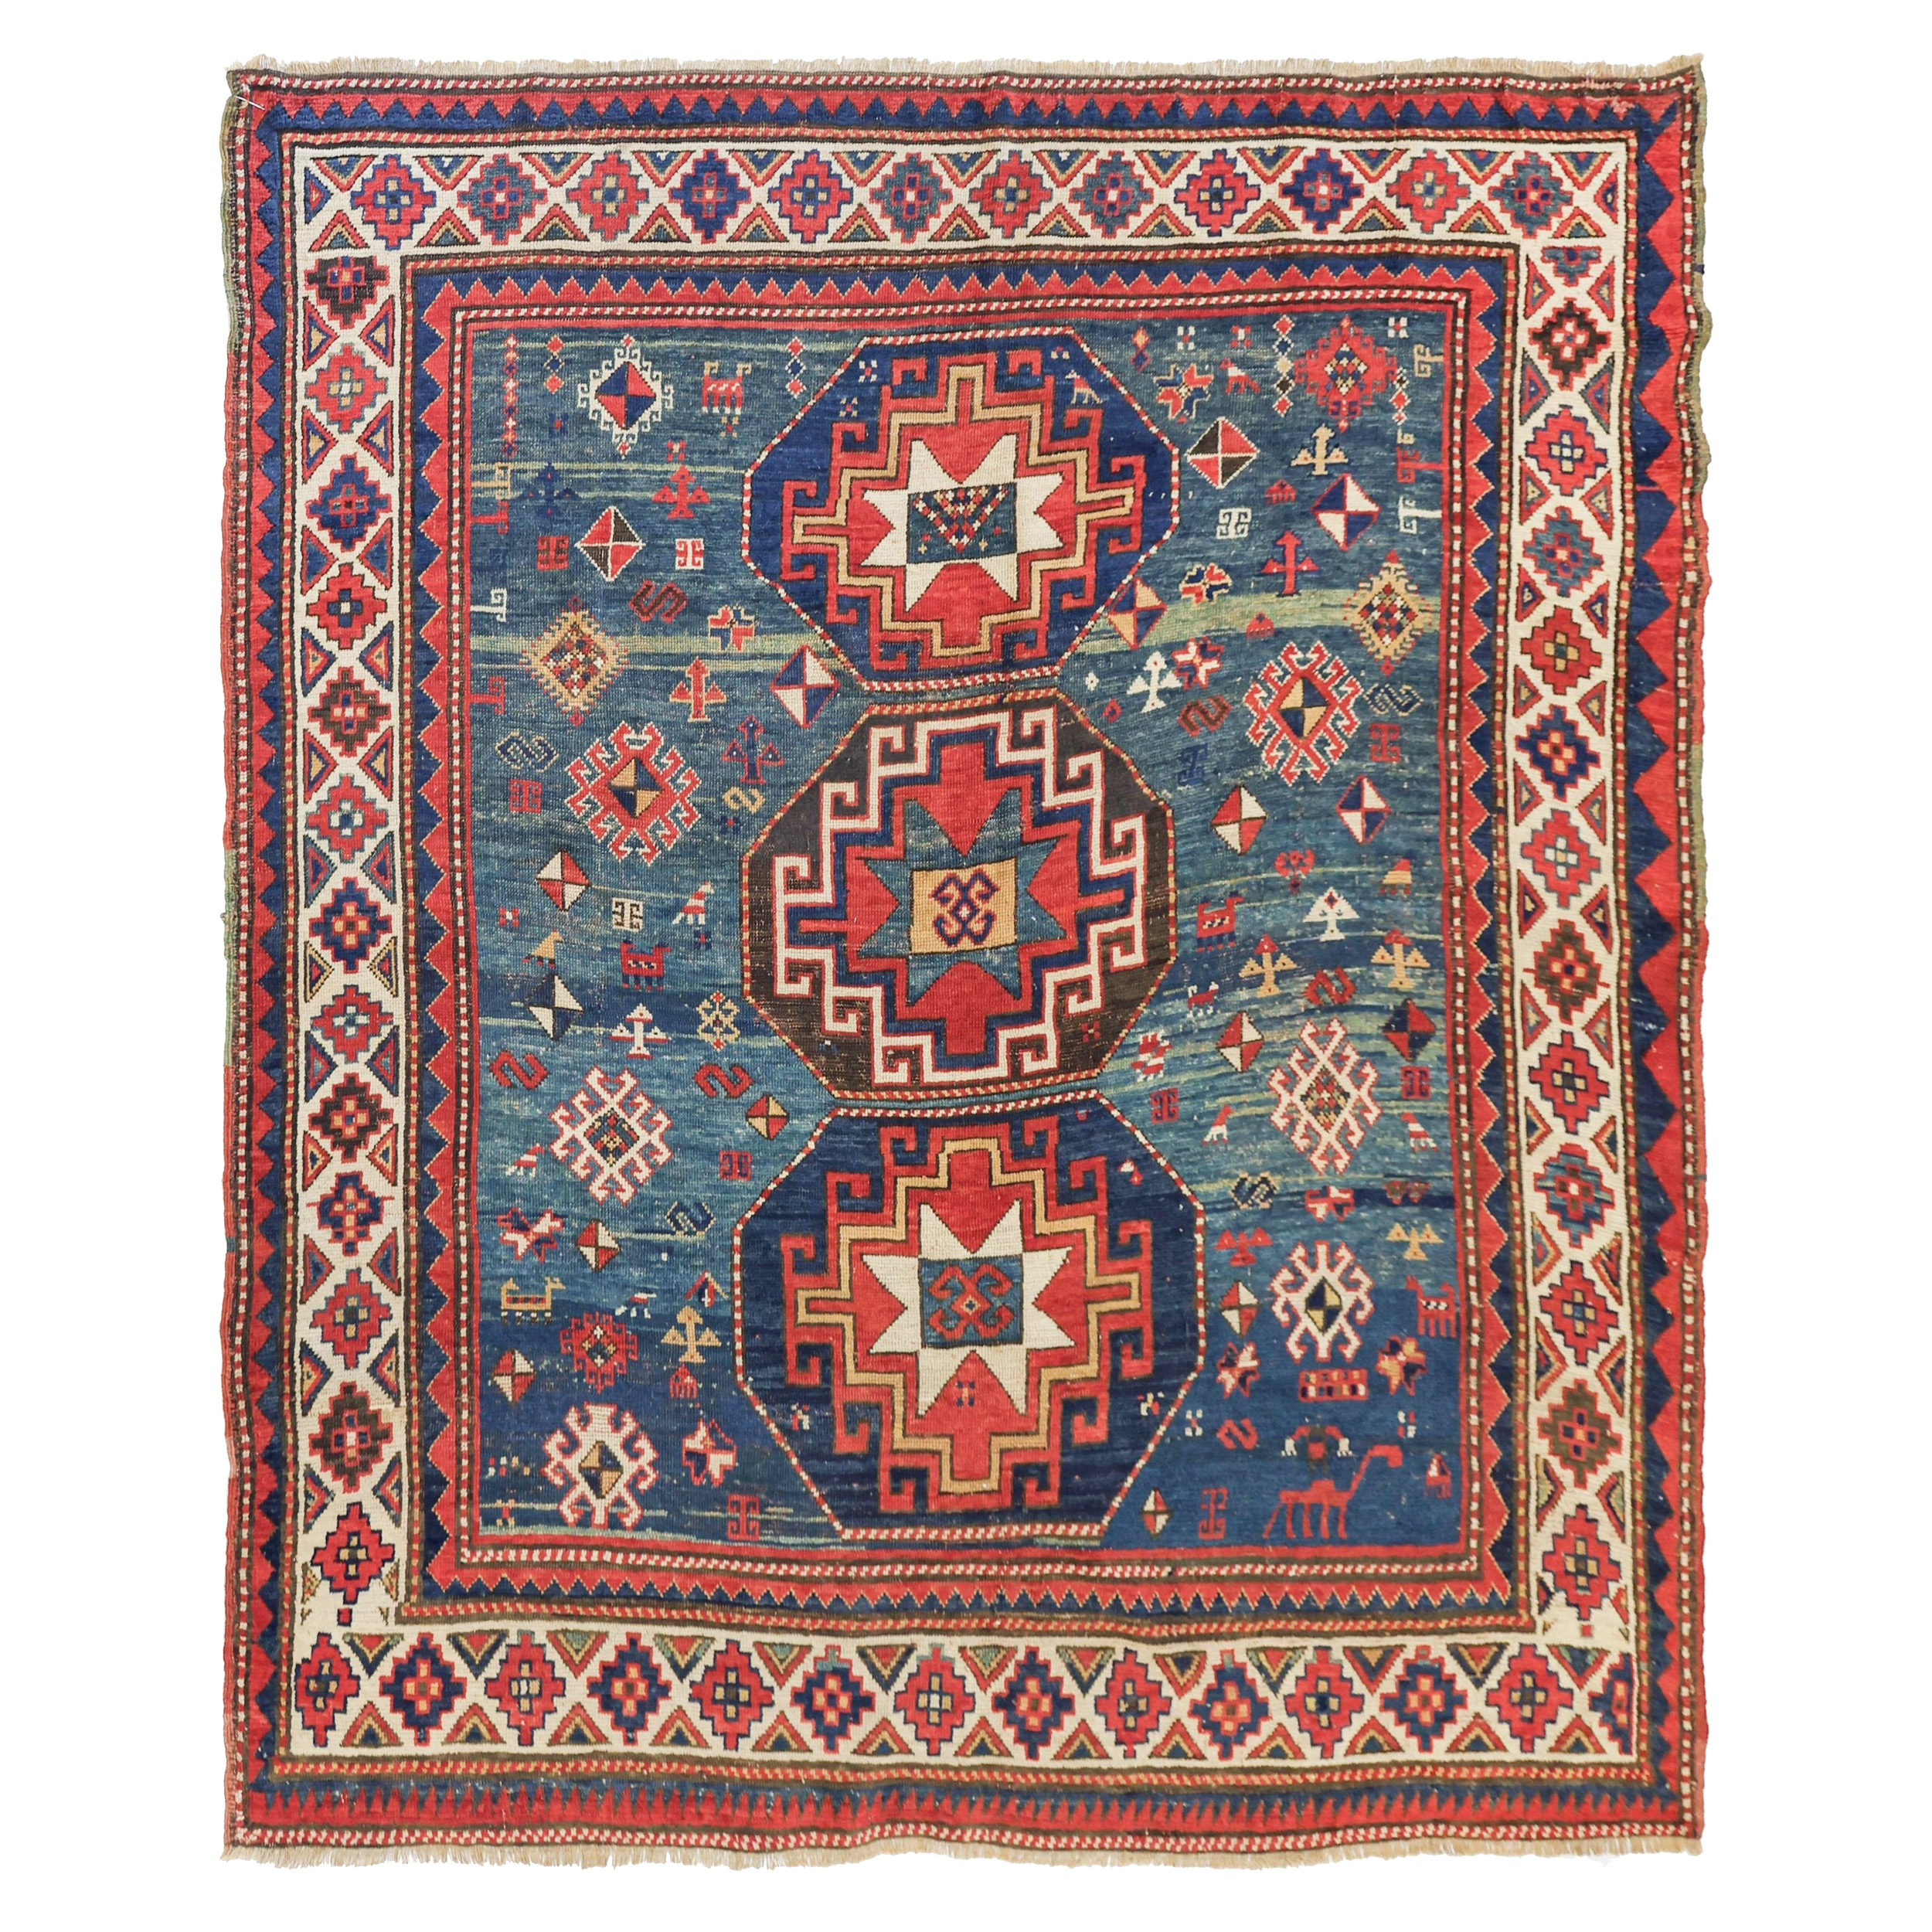 An early antique Caucasian Kazak rug with three Memling Guls on an abrashed blue green field, probably 3rd quarter of the 19th century.